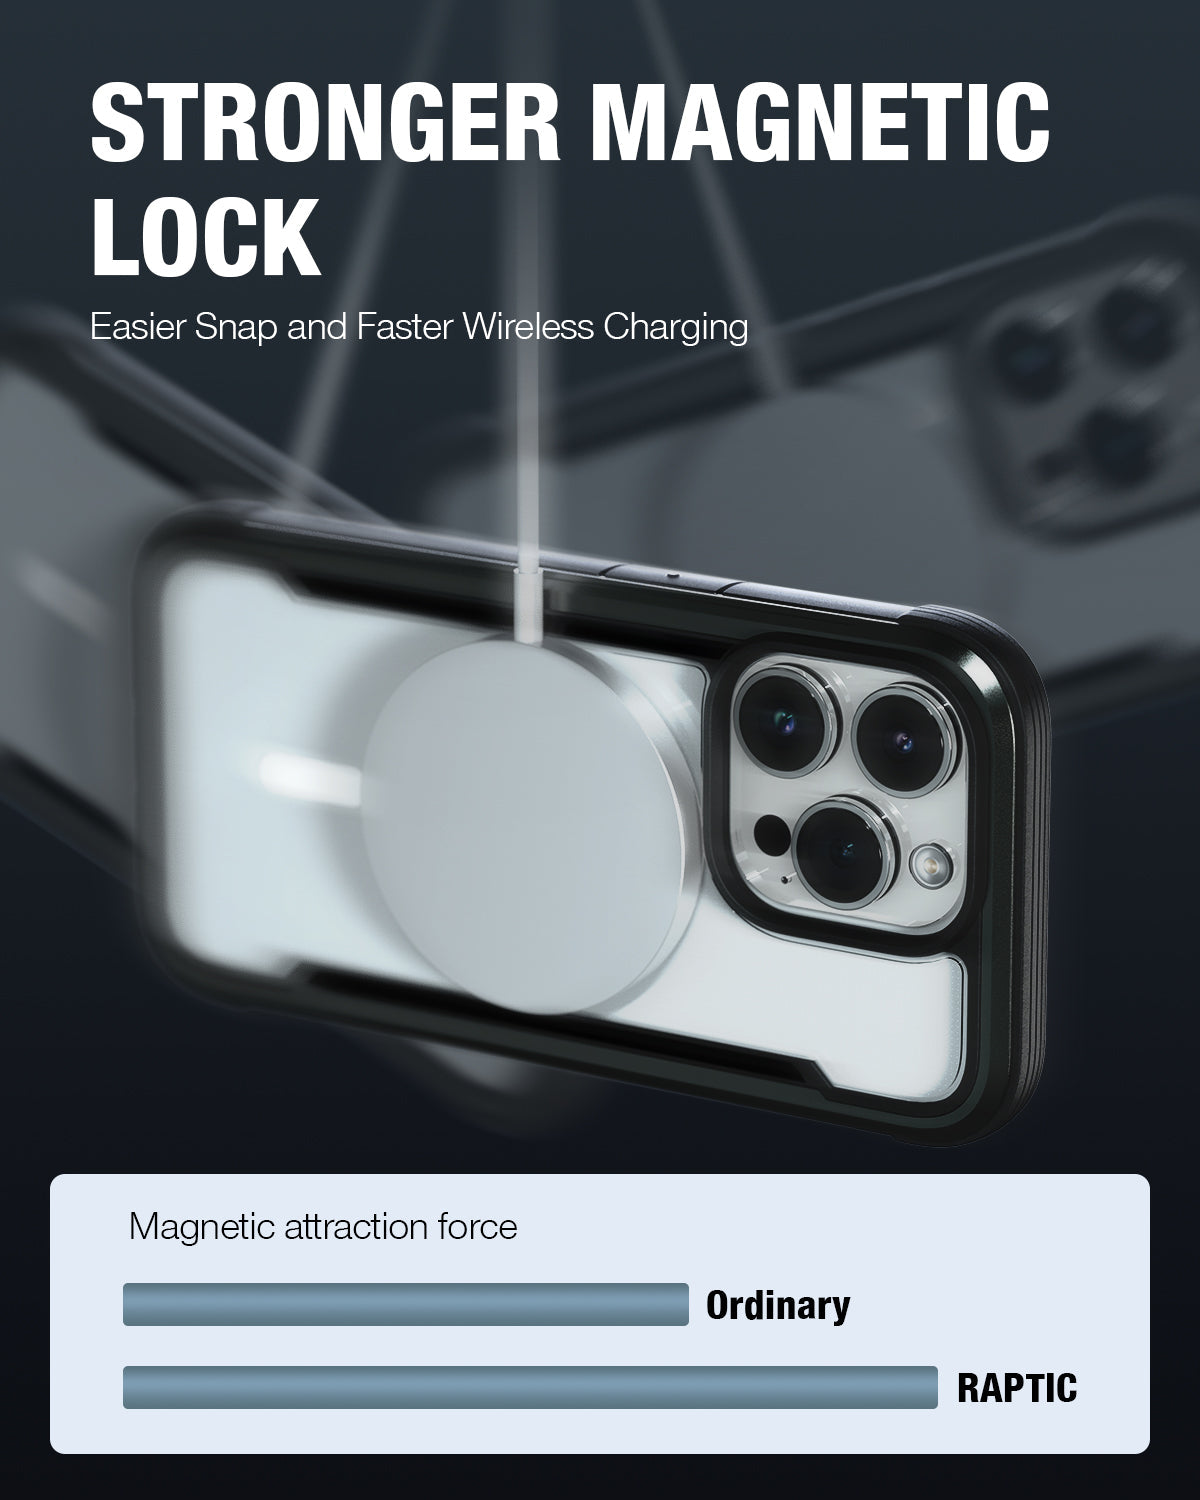 Upgrade to the Raptic iPhone 15 MagSafe Shield Case Bundle Clear for stronger magnetic lock and $32 savings.